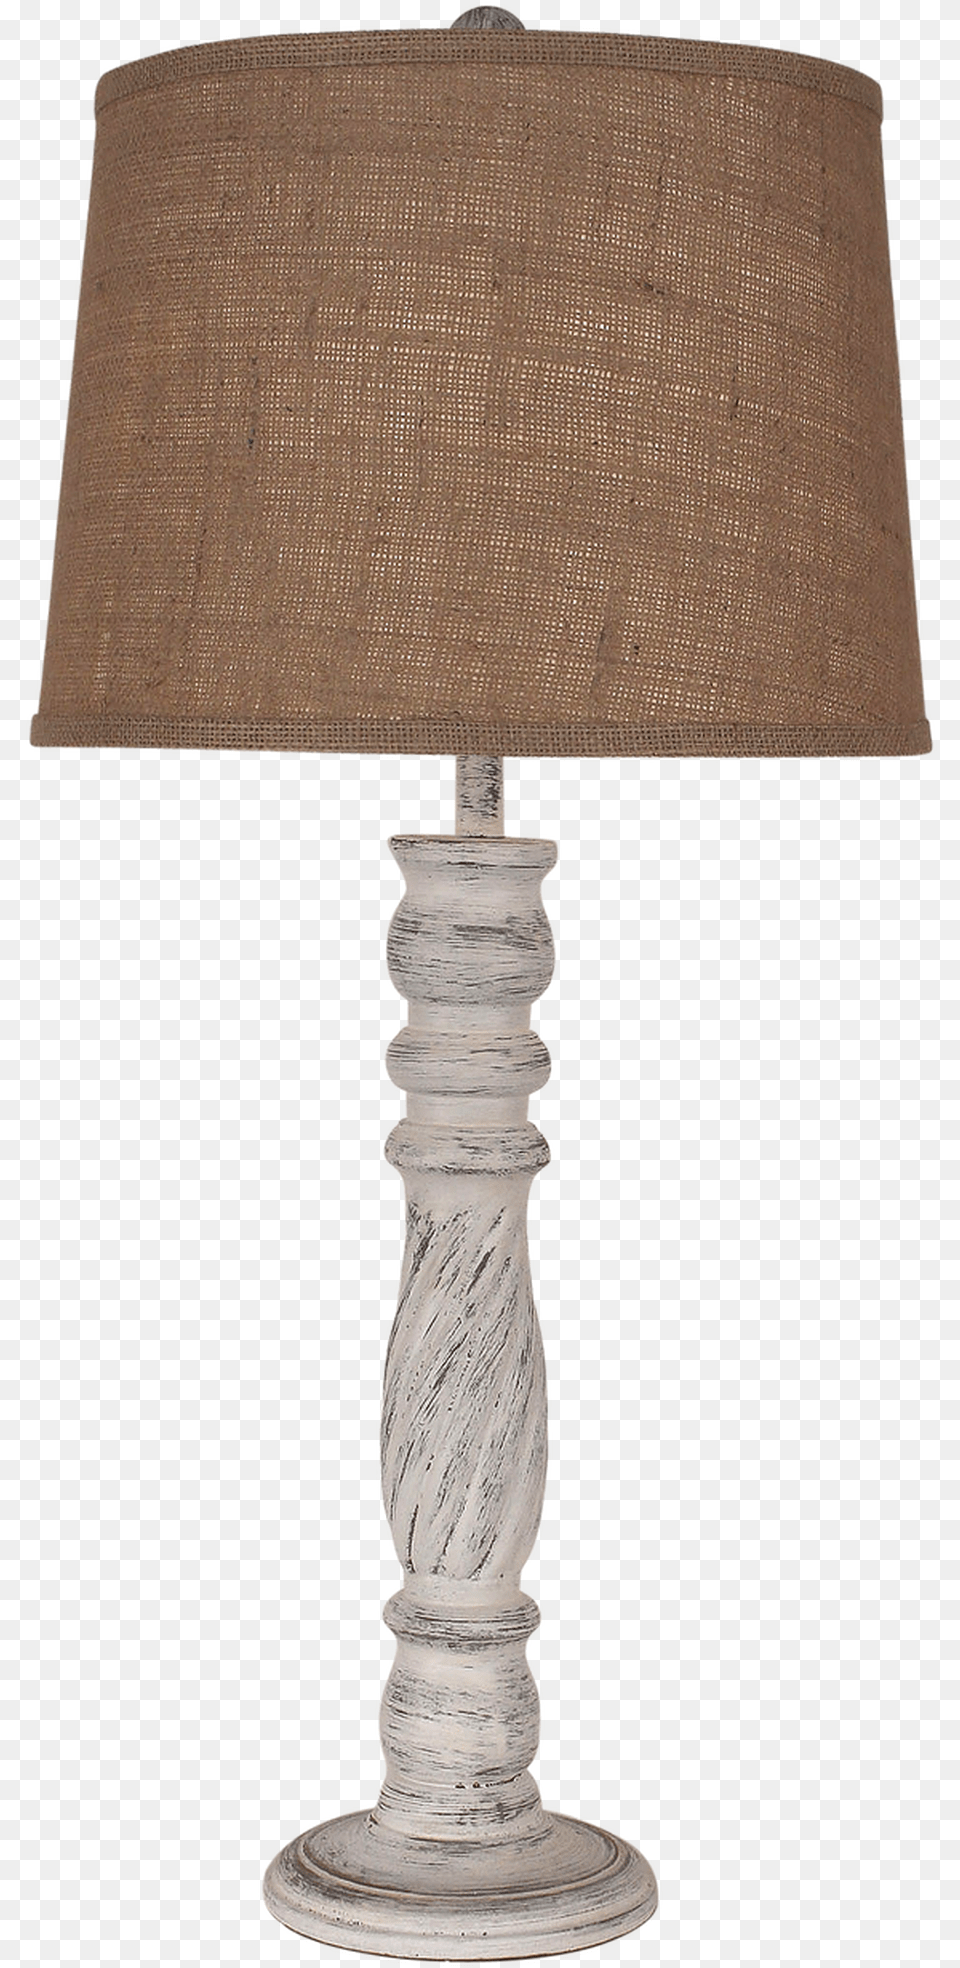 Coastal Cottage Light Ivory Swirl Table Lamp Lamp, Lampshade, Table Lamp, Accessories, Bag Png